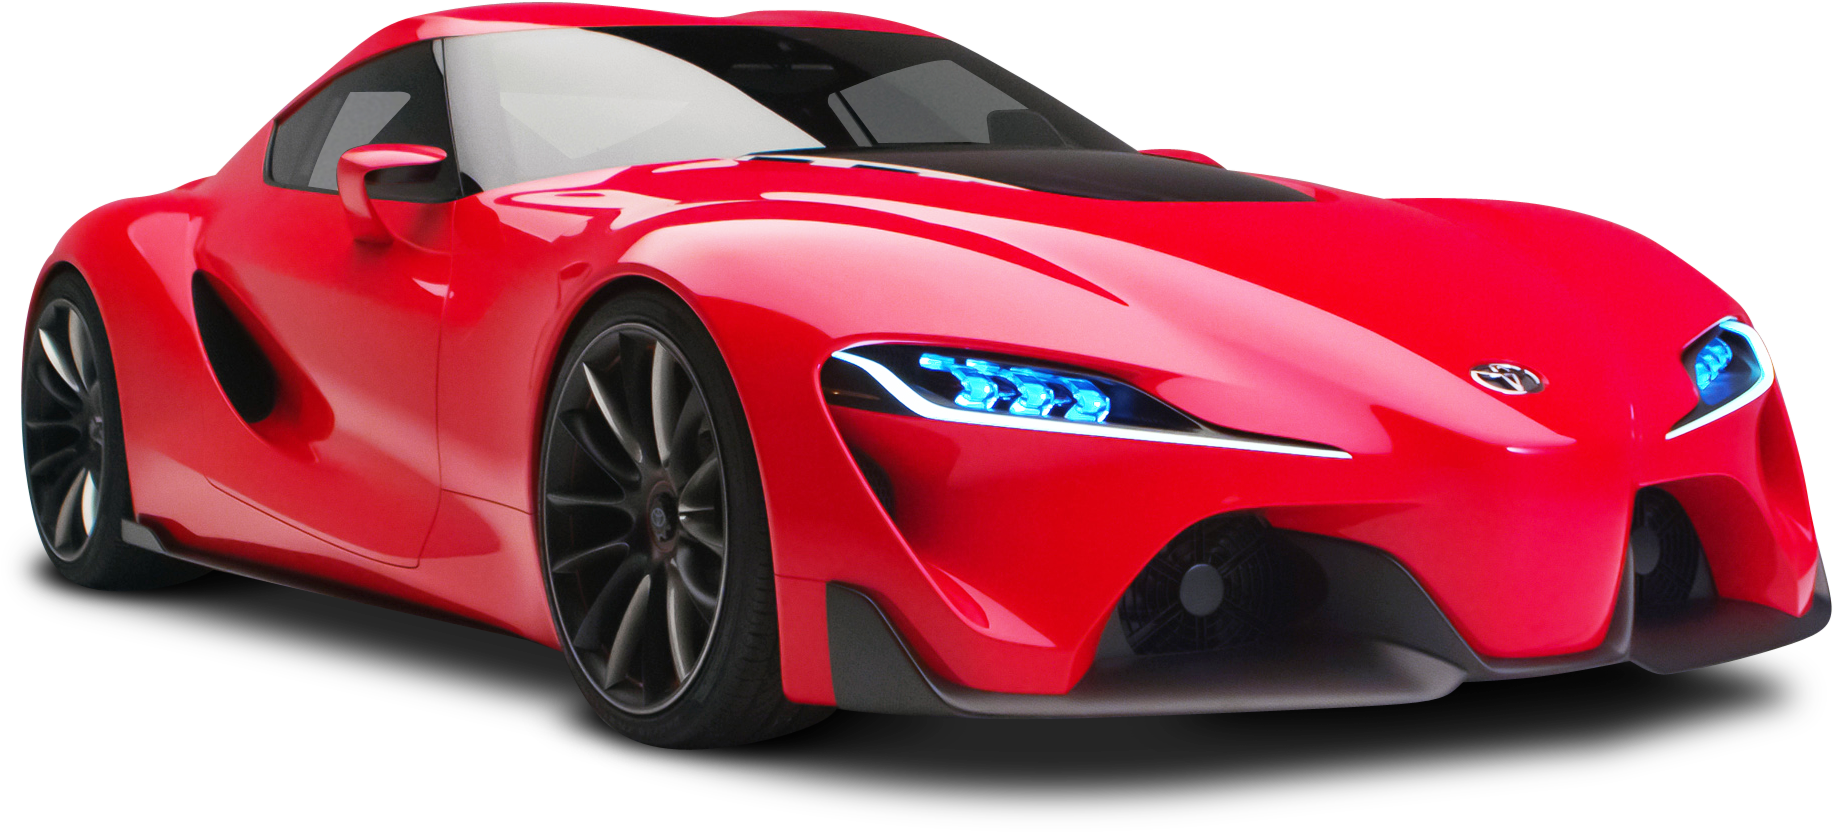 A Red Sports Car With Blue Lights